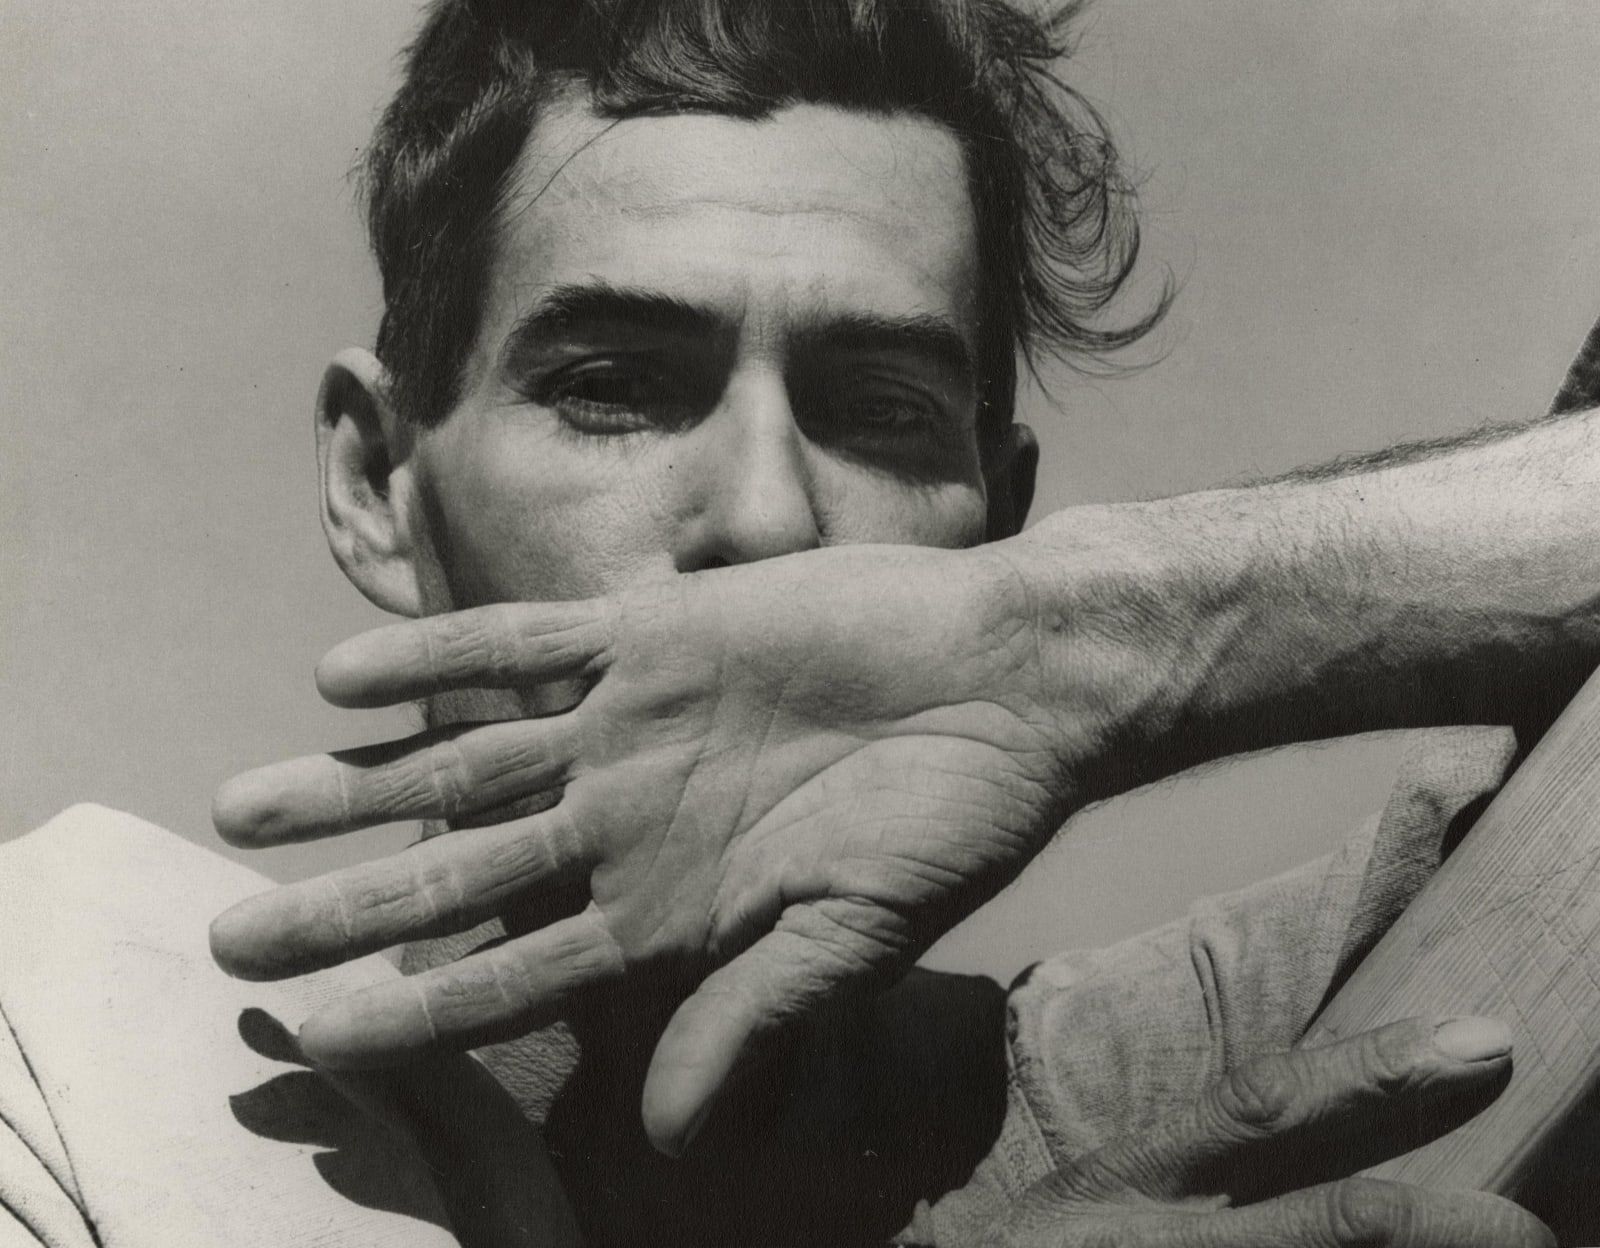 Migratory cotton picker with hand in front of his mouth by Dorothea Lange